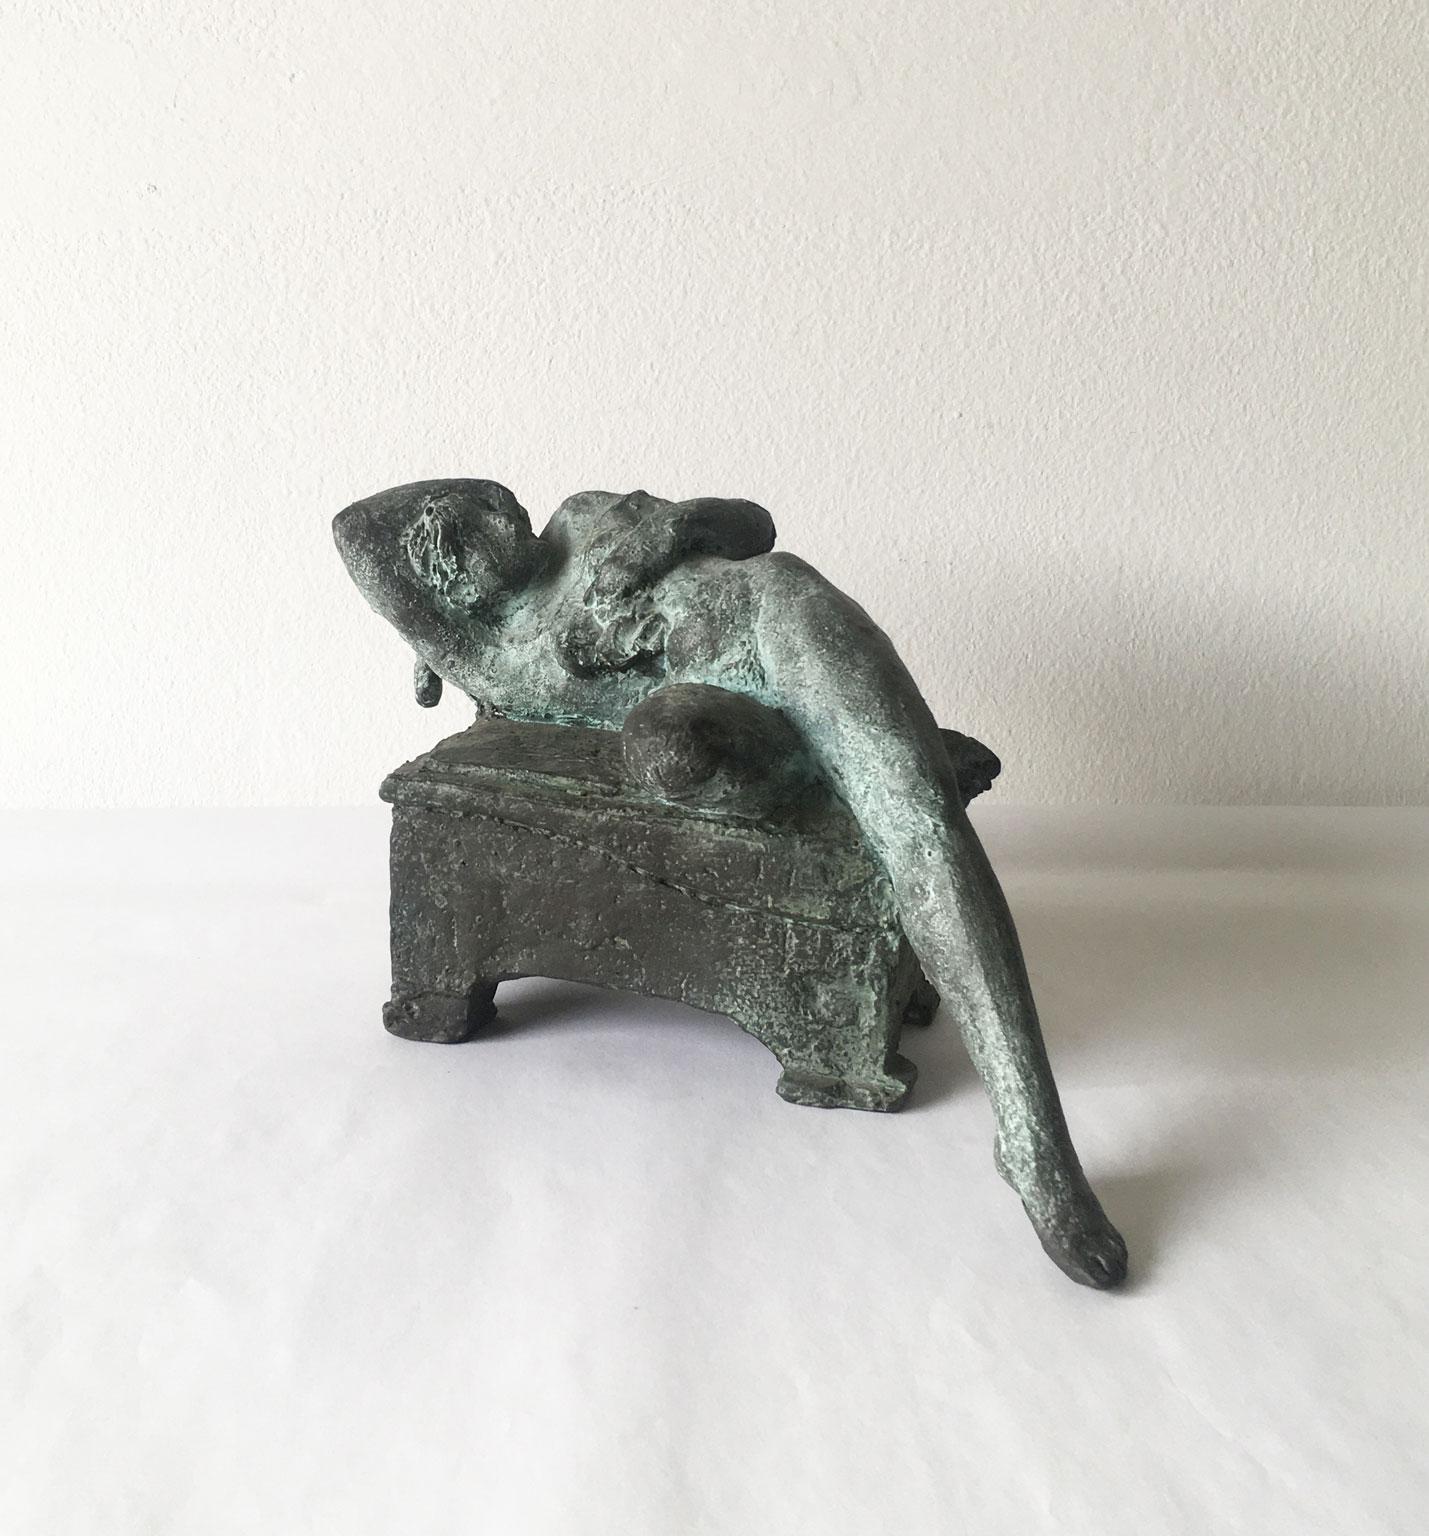 This is an intense bronze sculpture created by the Italian artist Ugo Riva, in 2006. Lost wax bronze on iron basement.
The title of this artwork is "Innocente provocazione" , translated in "Innocent provocation".

In this astonishing sculpture, the